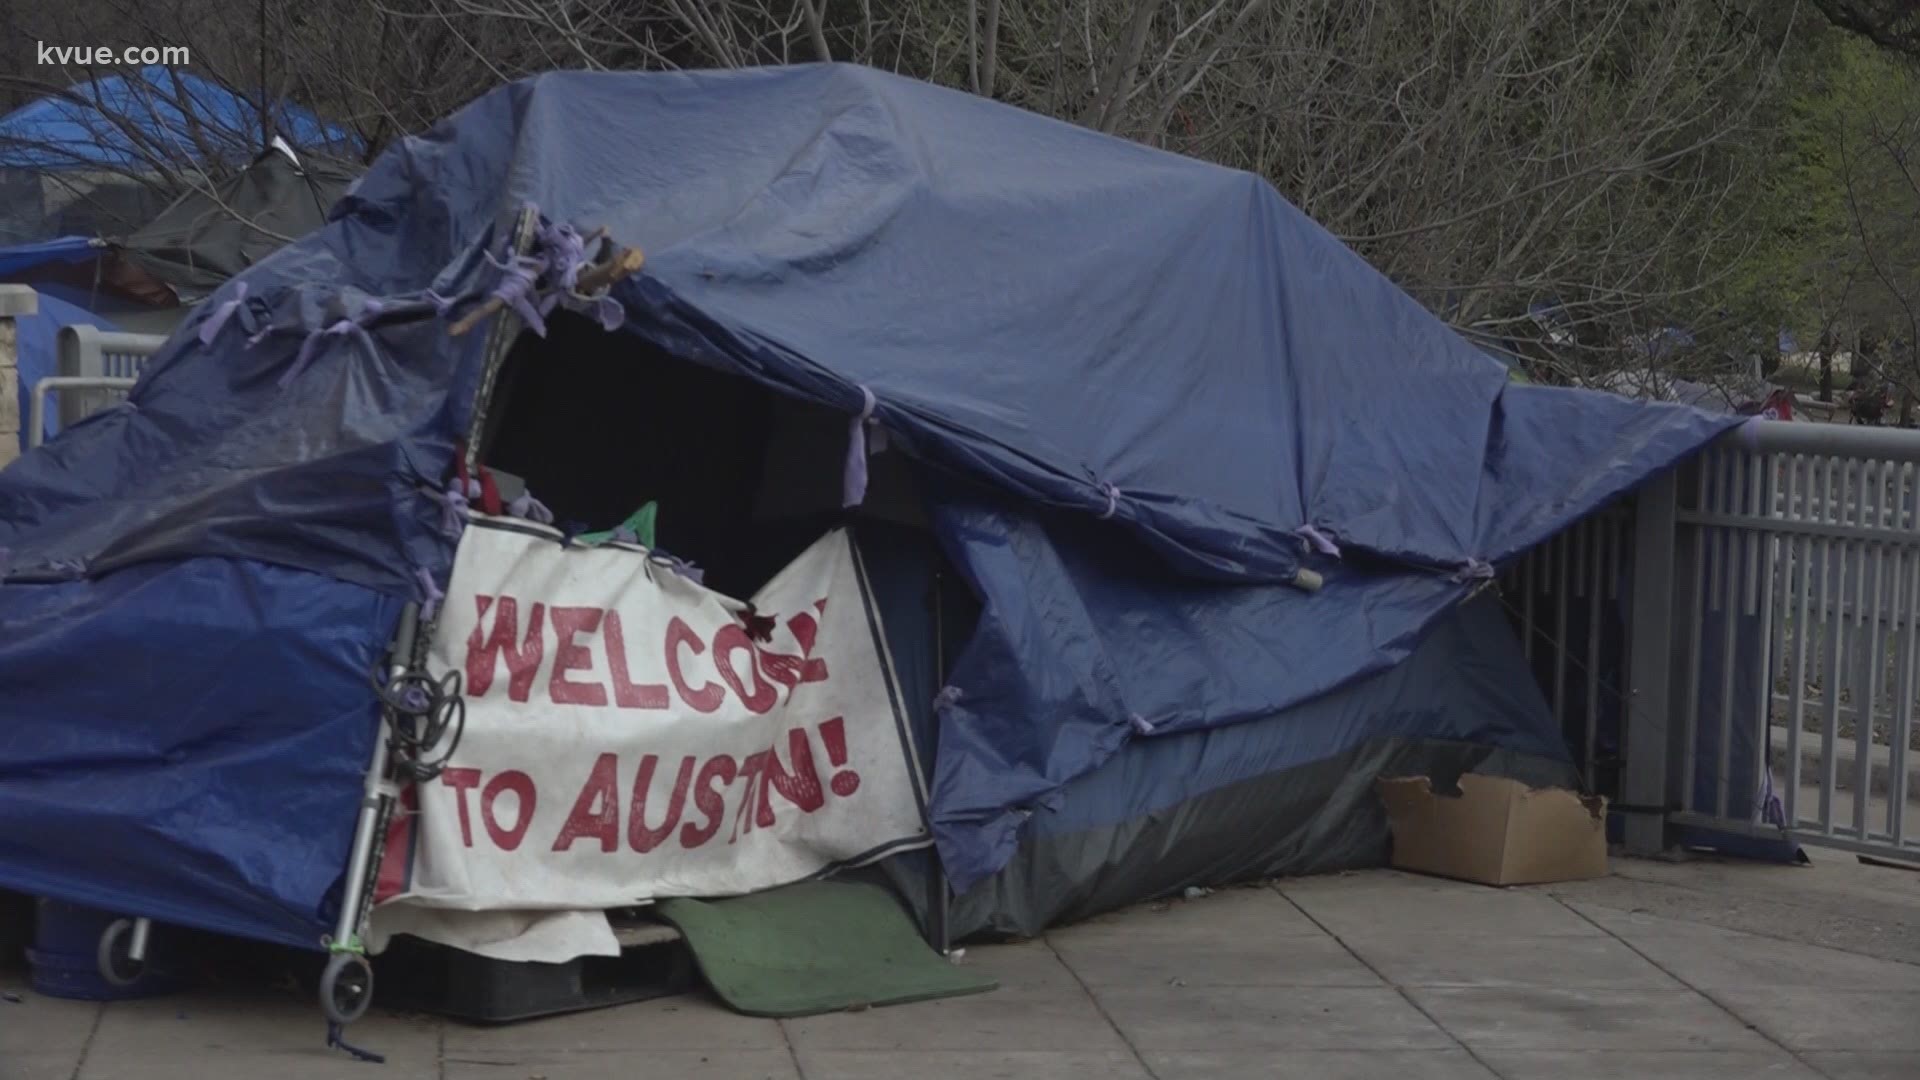 The City of Austin has a plan to connect more people experiencing homelessness to housing by late summer.